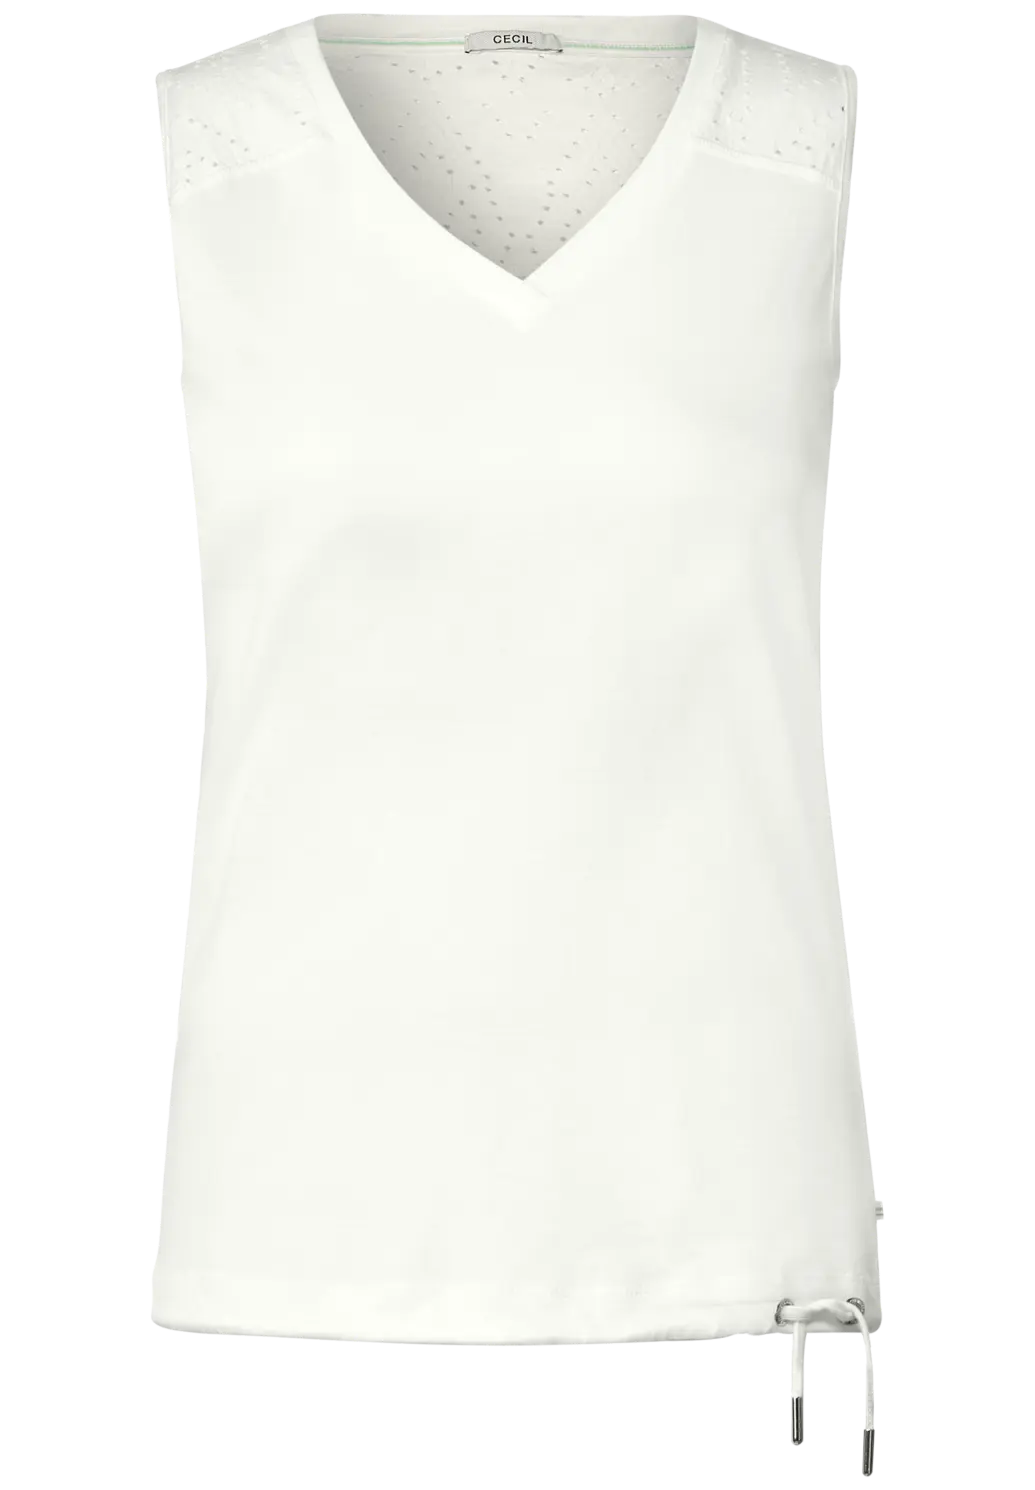 Cecil white jersey lace detail top 320164